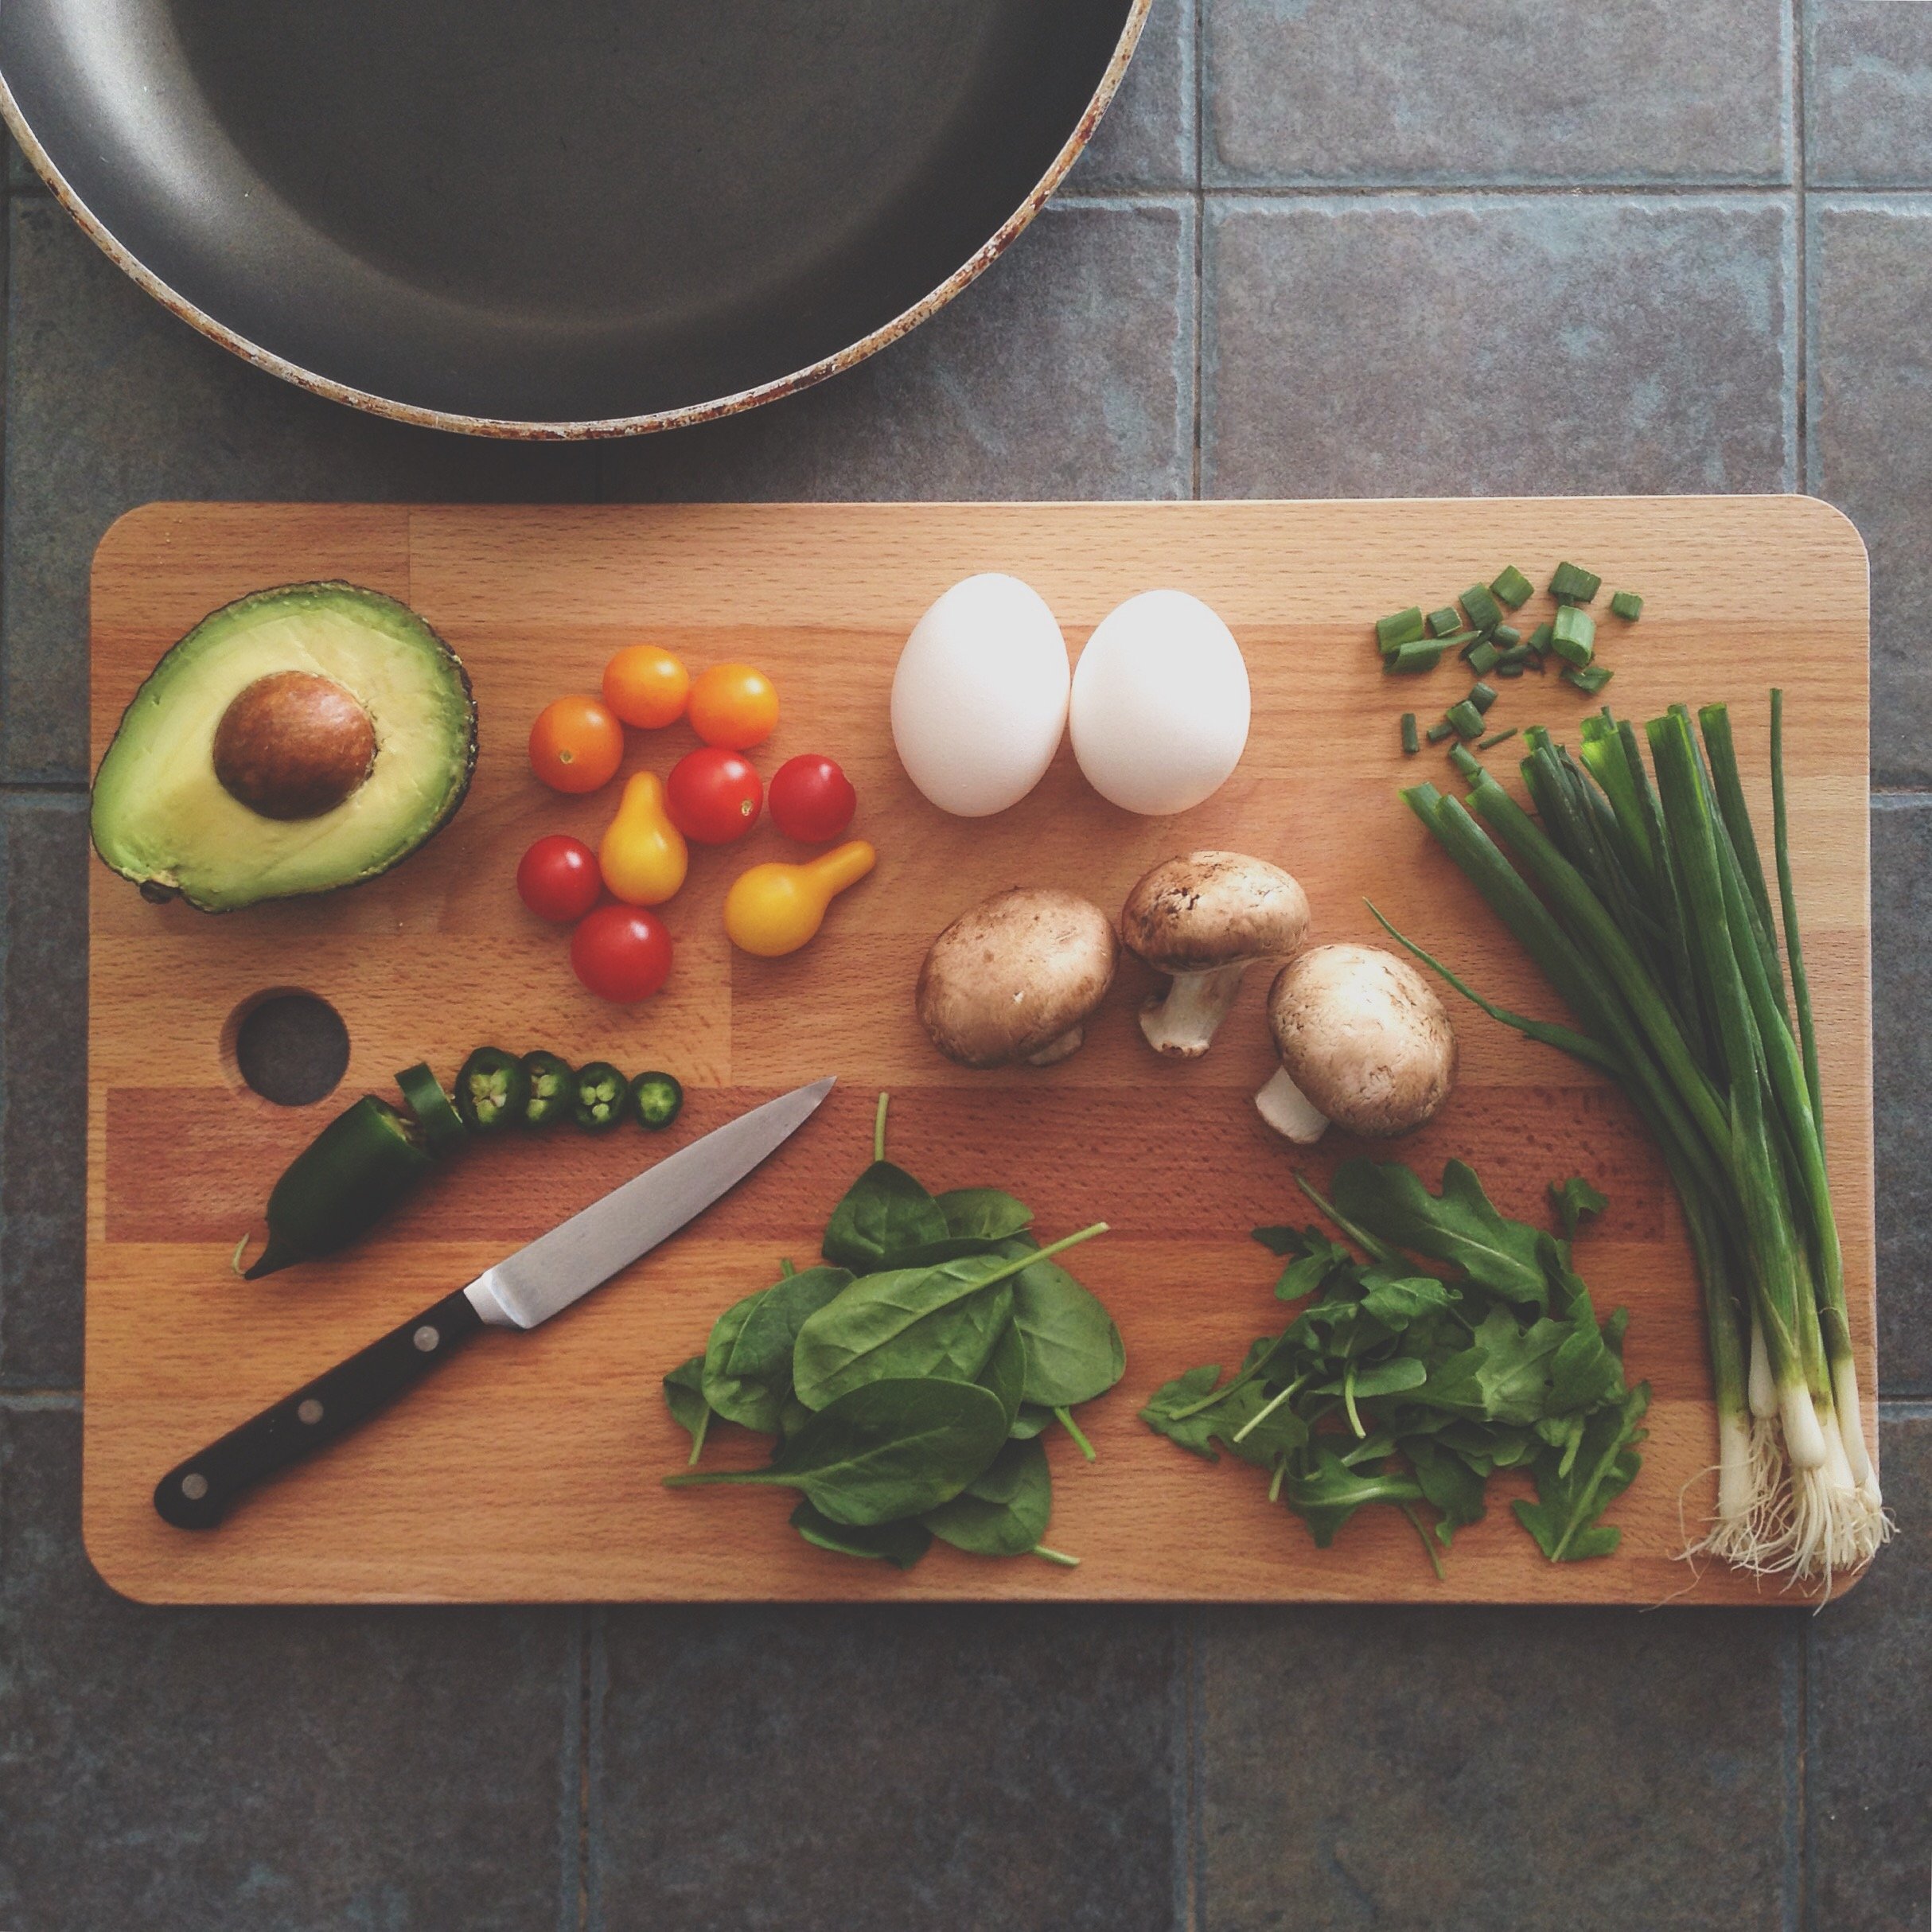 The Best Non-Toxic Eco-friendly Cutting Boards — The Honest Consumer